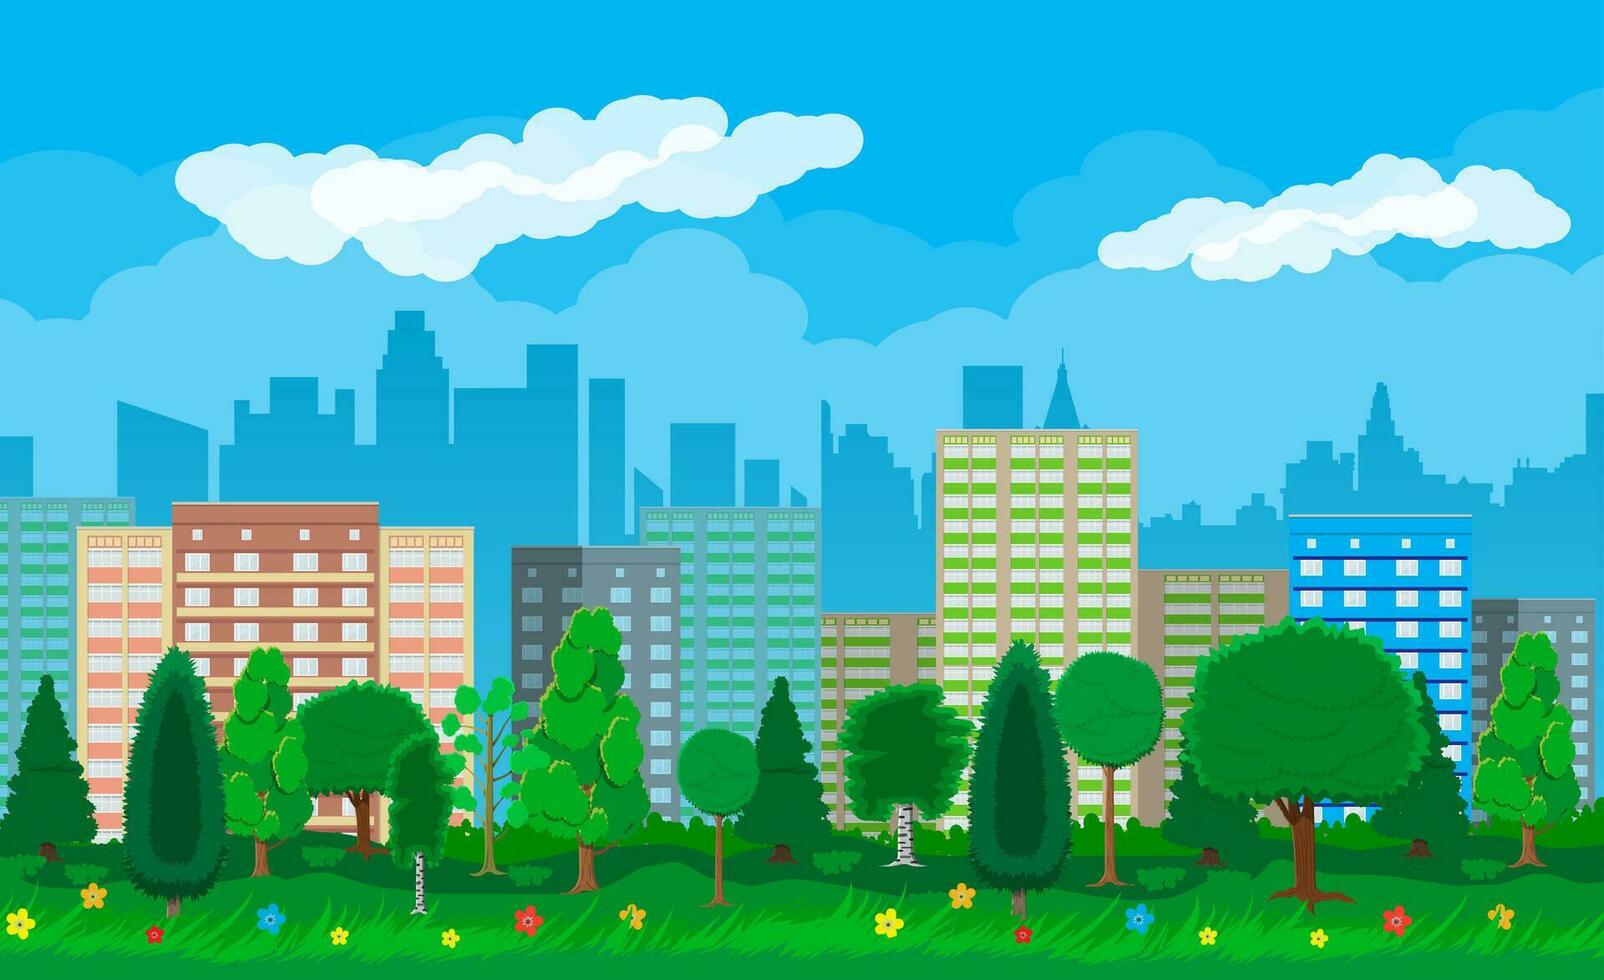 Modern city view. Cityscape with office and residental buildings, city park with trees and flowers, sky and clouds. Vector illustration in flat style